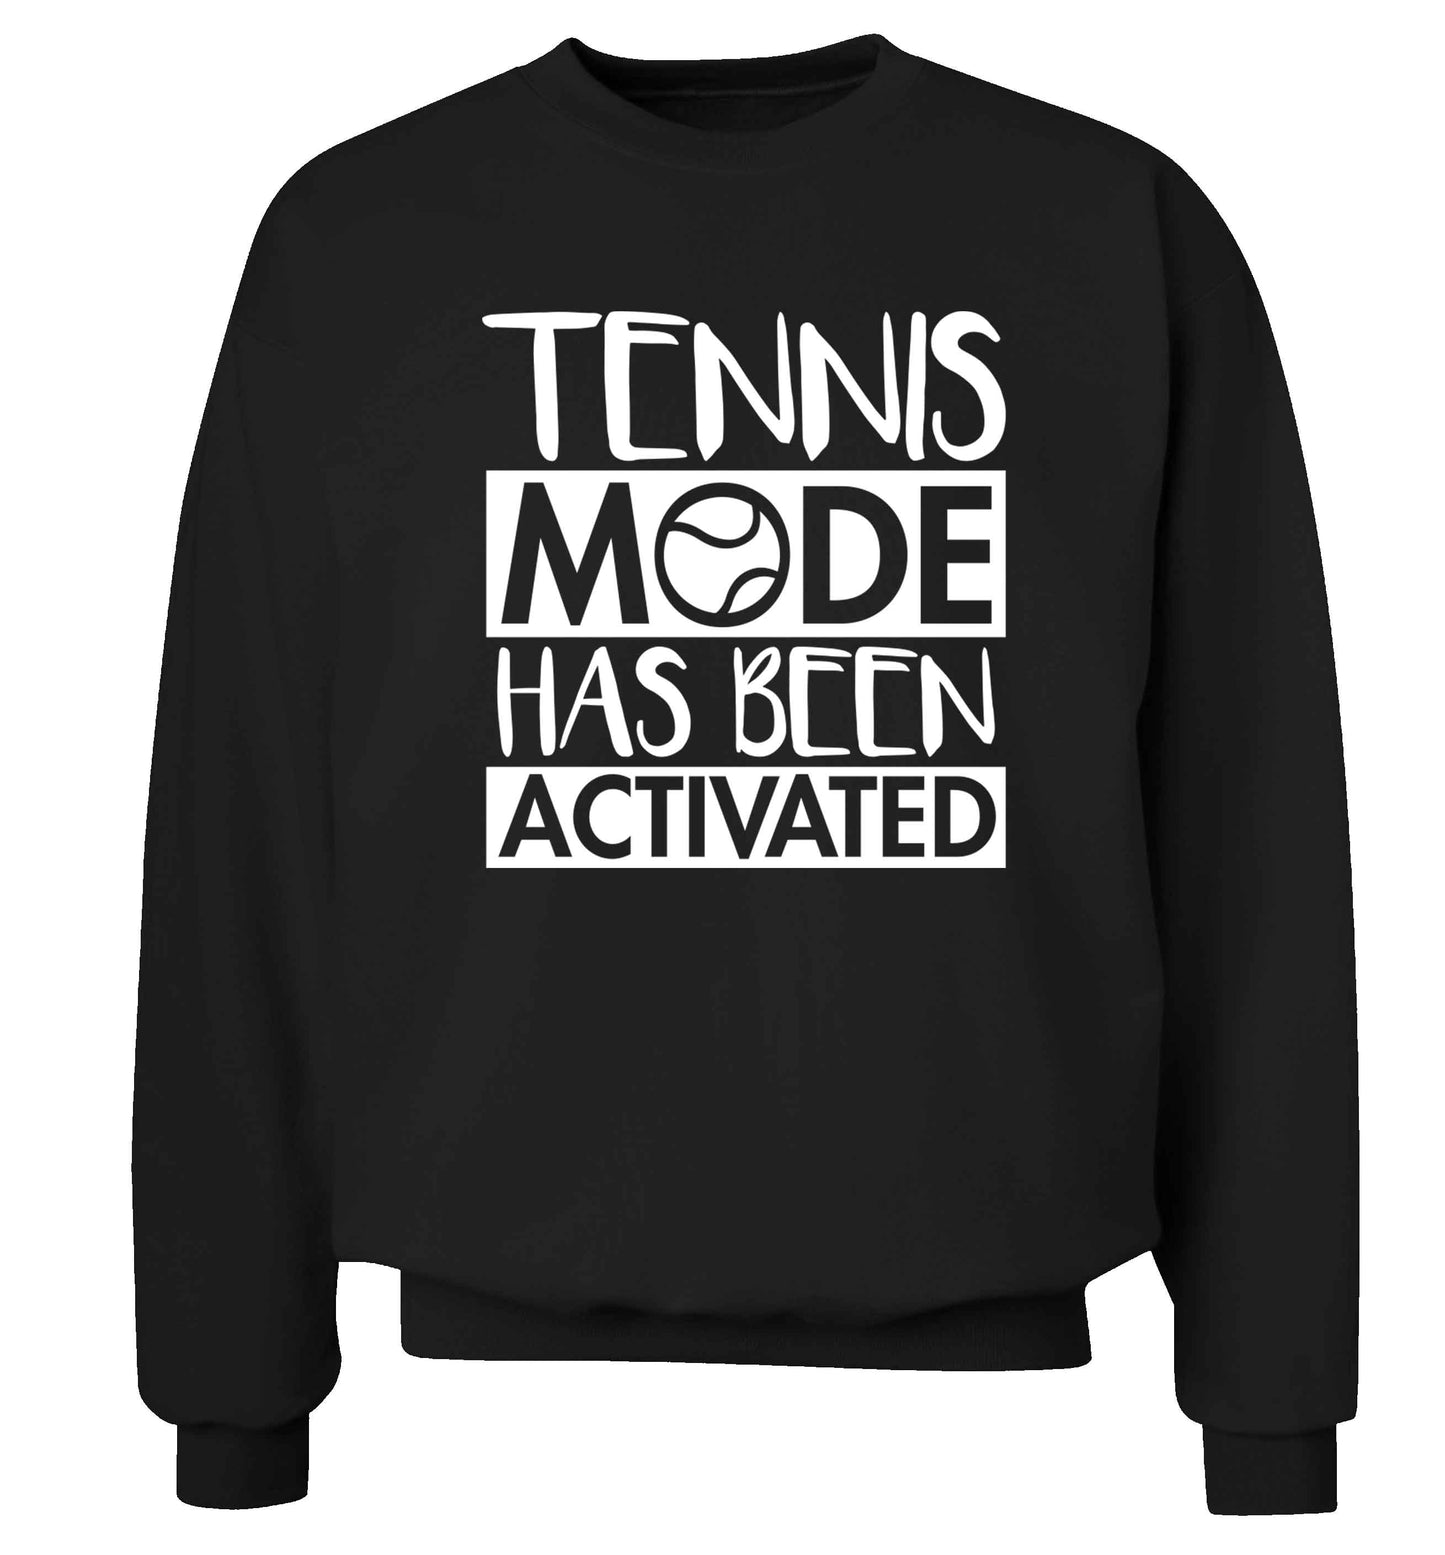 Tennis mode has been activated Adult's unisex black Sweater 2XL